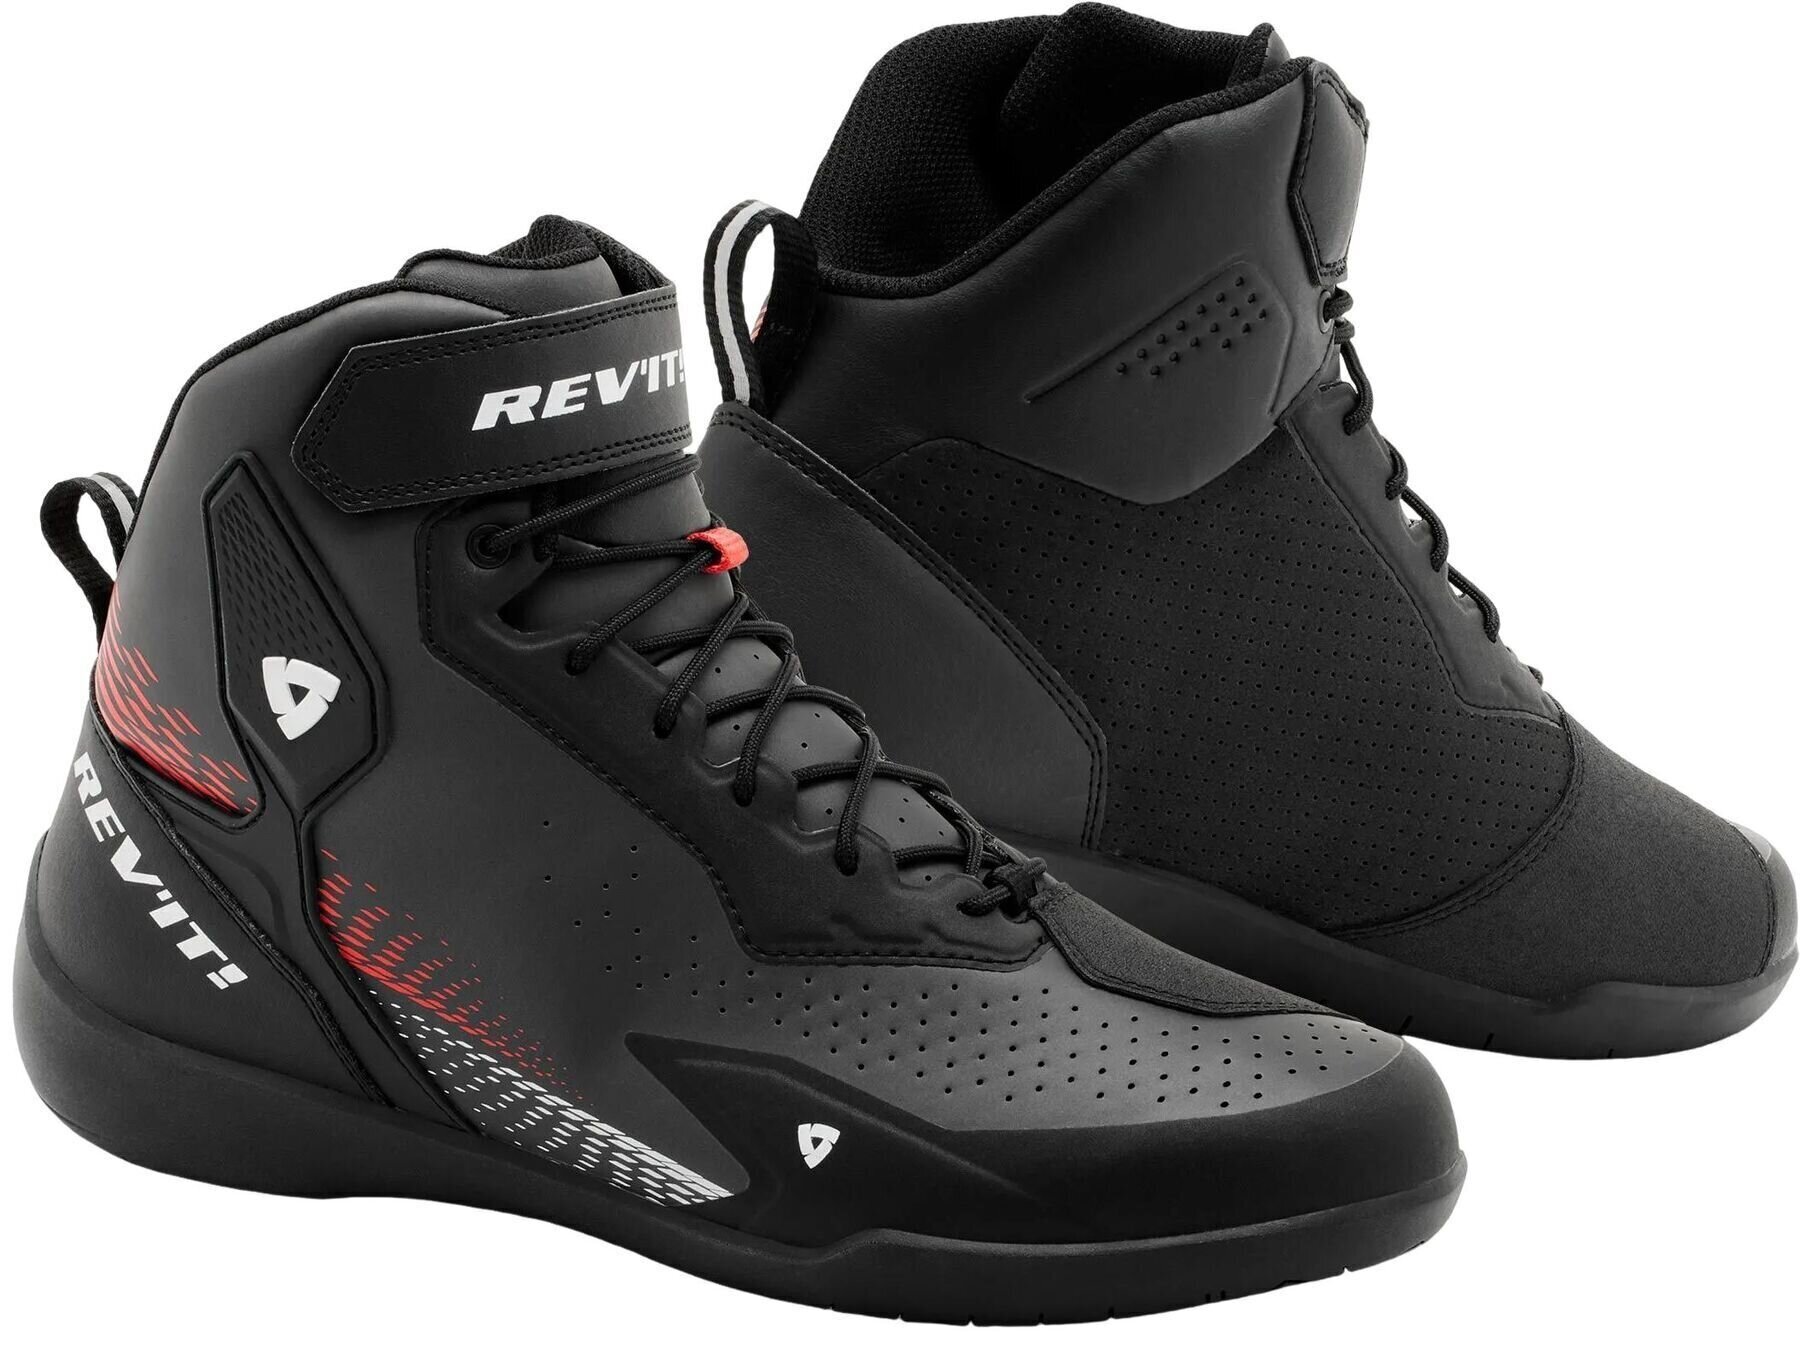 Topánky Rev'it! Shoes G-Force 2 Black/Neon Red 43 Topánky